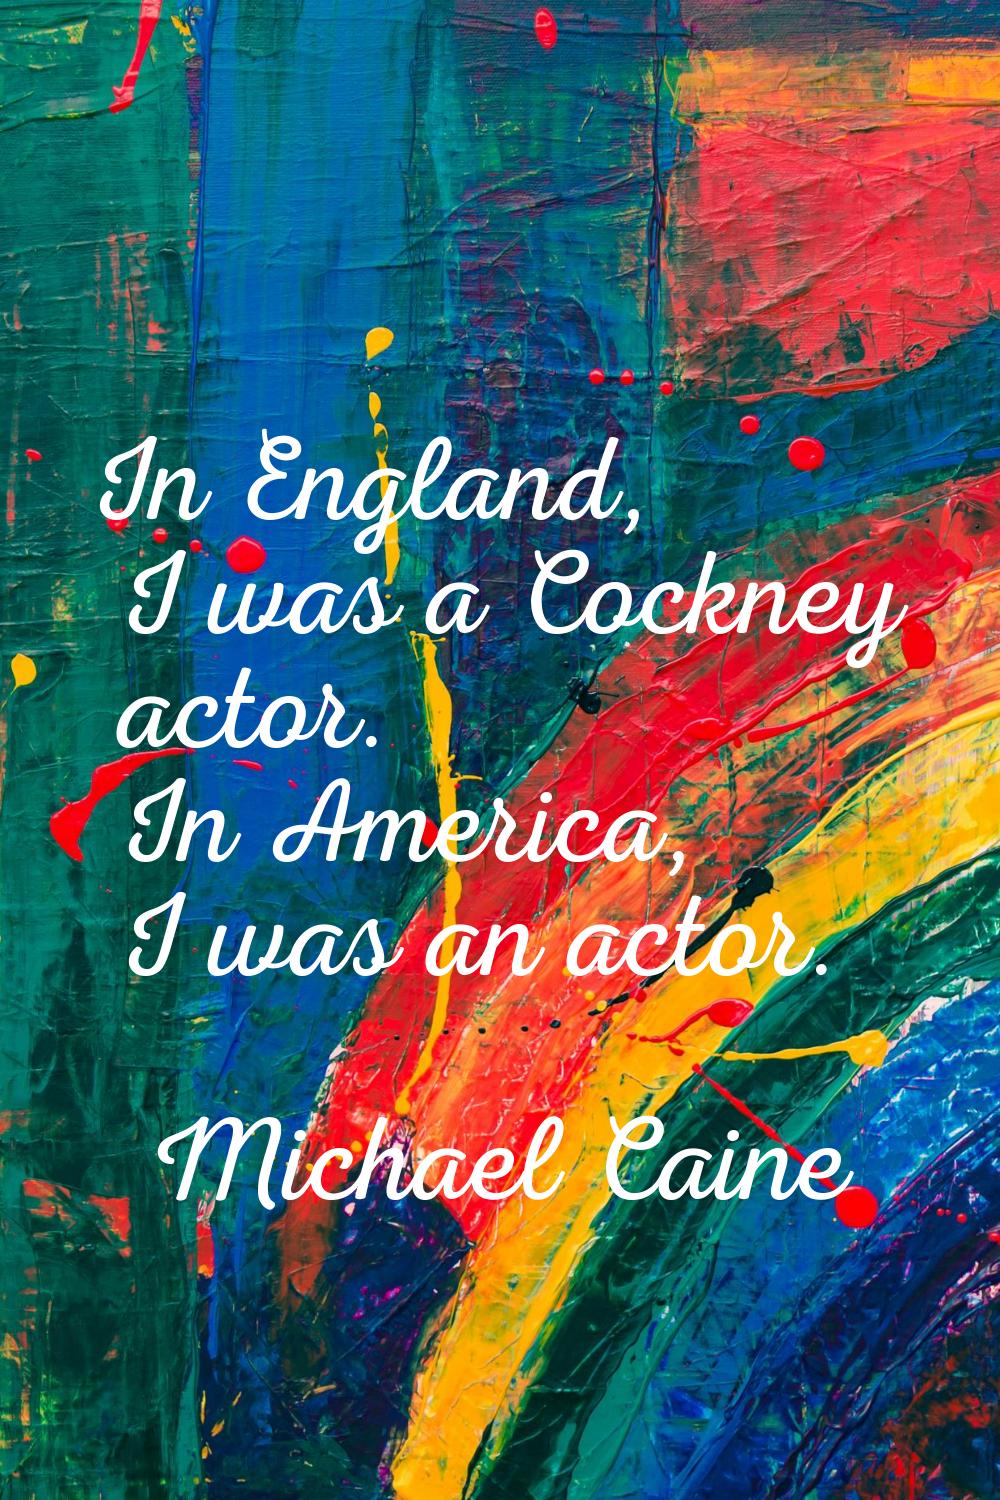 In England, I was a Cockney actor. In America, I was an actor.